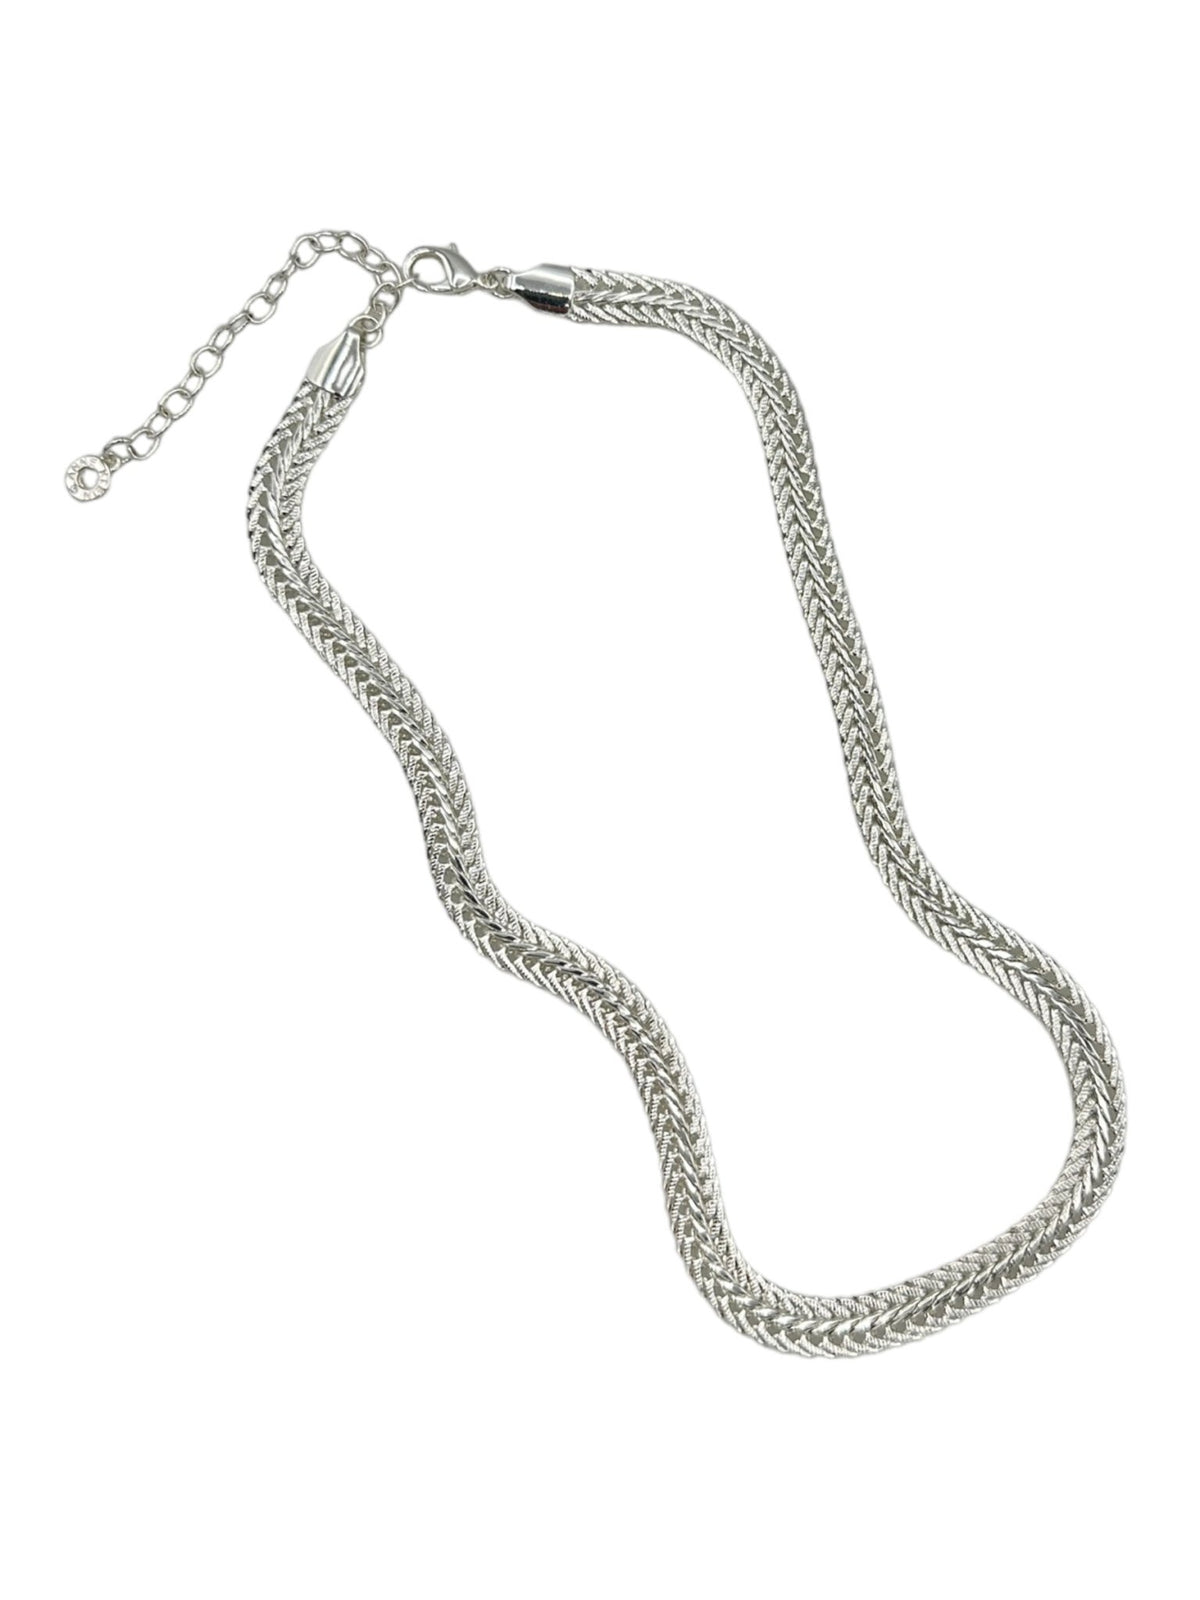 Anne Klein Classic Heavy Link Silver Chain Necklace - 24 Wishes Vintage Jewelry